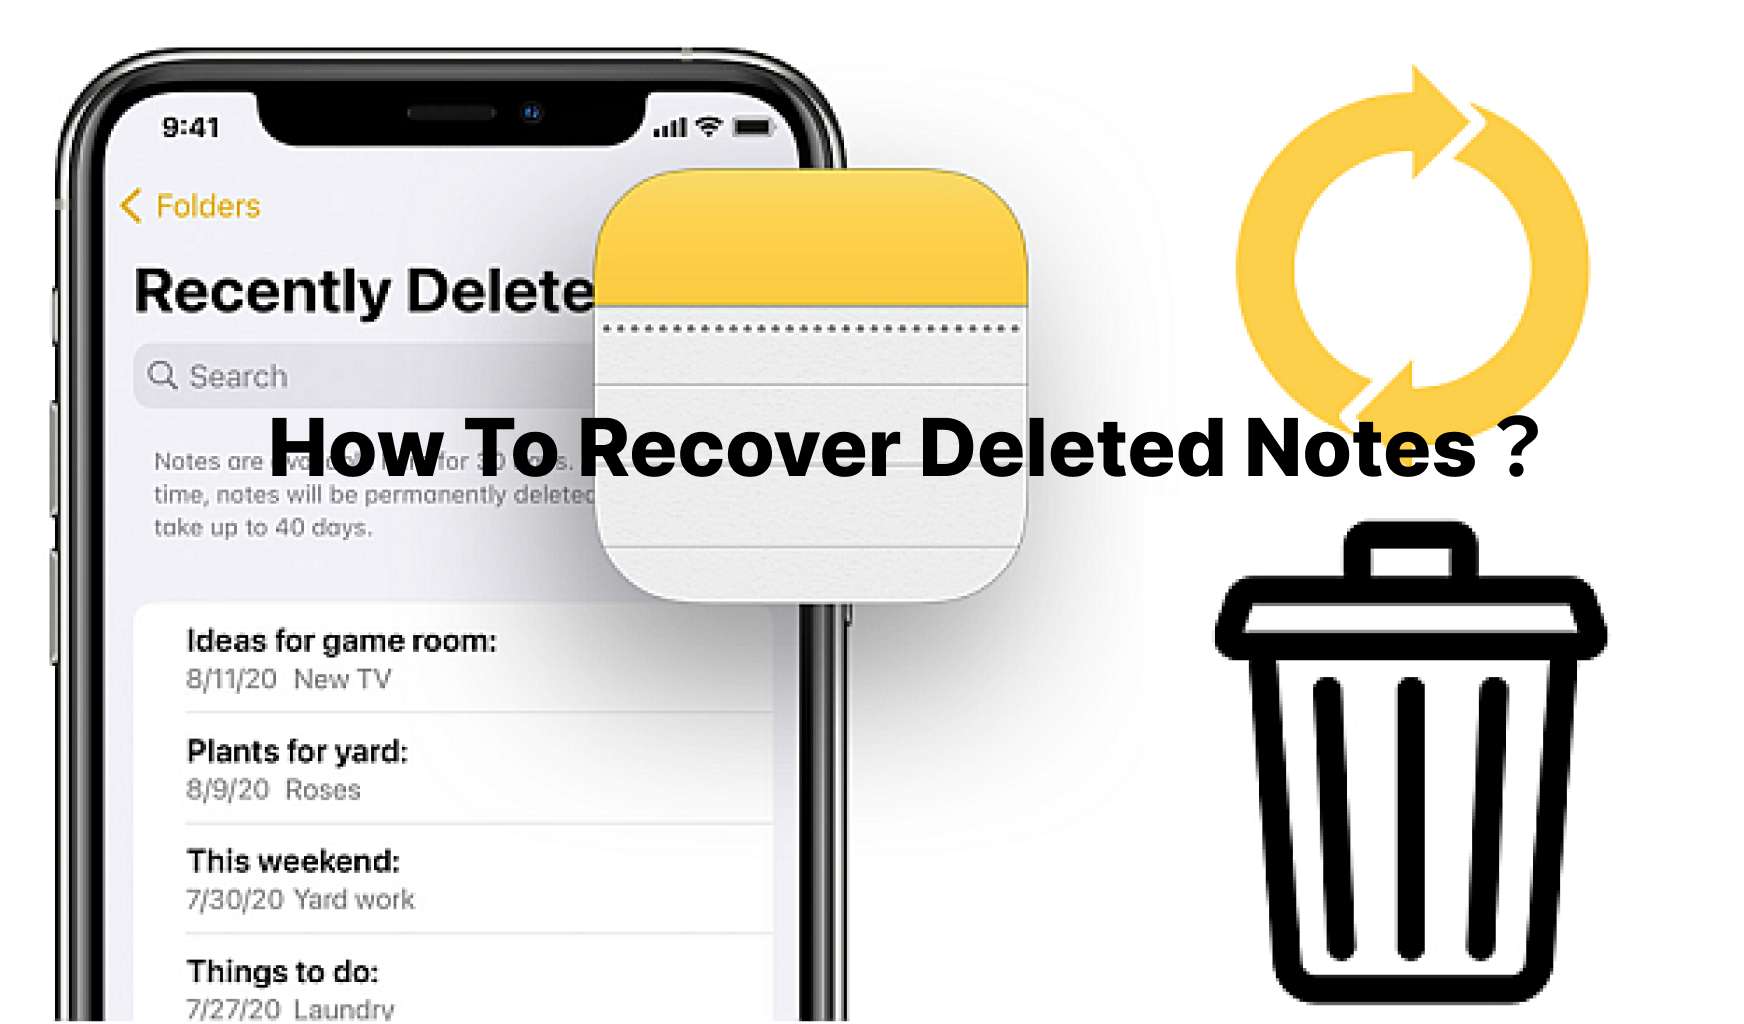 How To Recover Deleted Notes on iPhone? [4 Solutions]